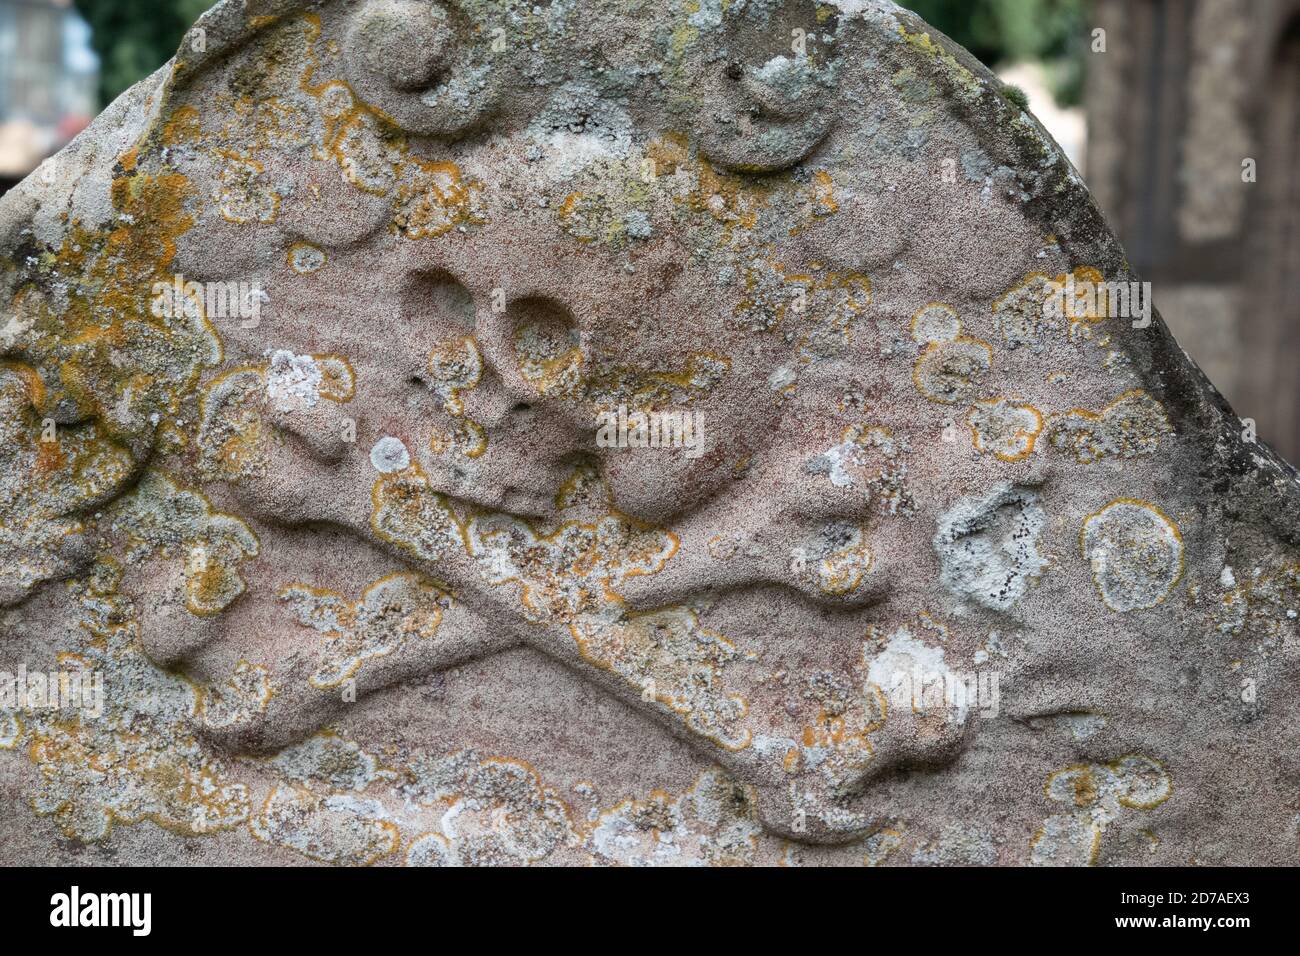 Old grave headstone with skull and crossbones is a symbol of a human skull with two long bones crossed below it. Stock Photo